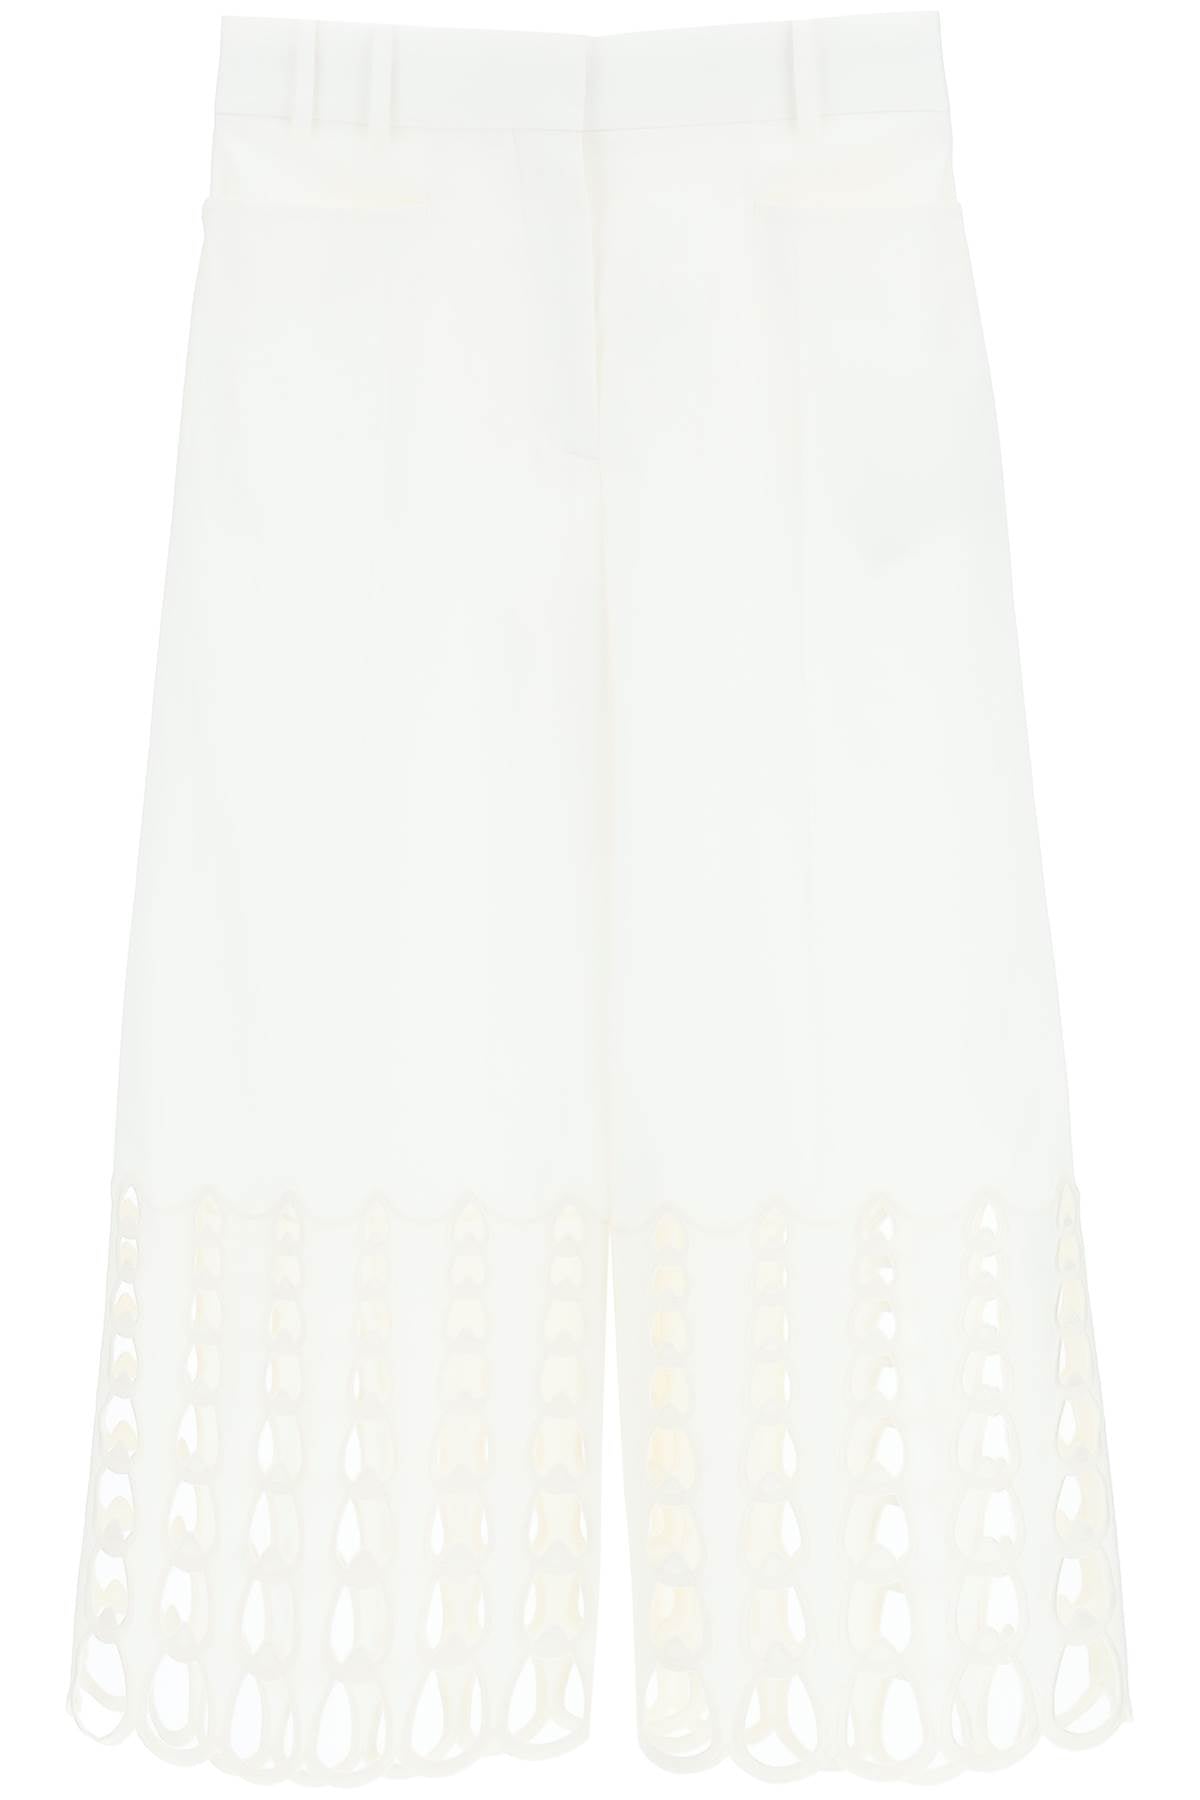 STELLA MCCARTNEY Embroidered White Cropped Pants - SS23 Collection